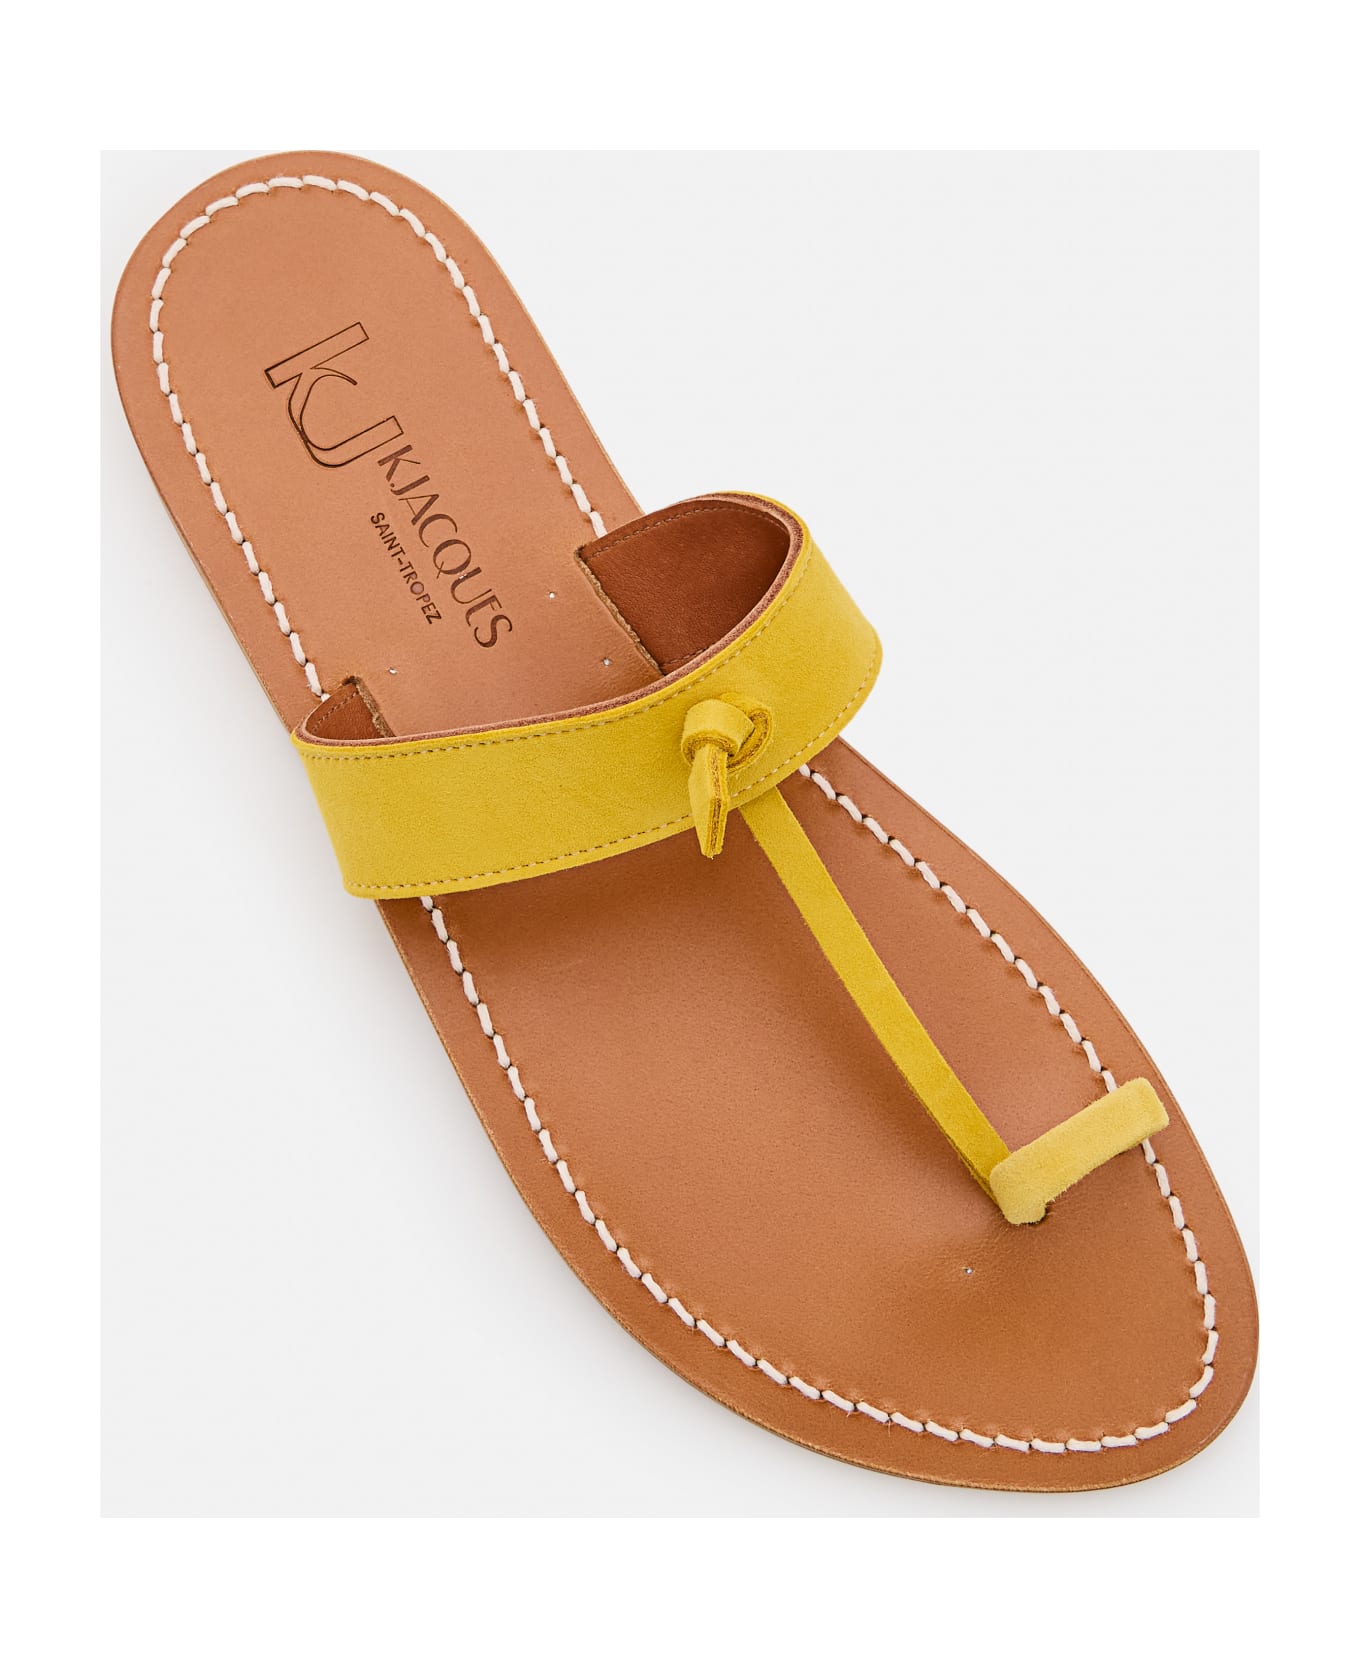 K.Jacques Ganges Leather Sandals - Yellow サンダル